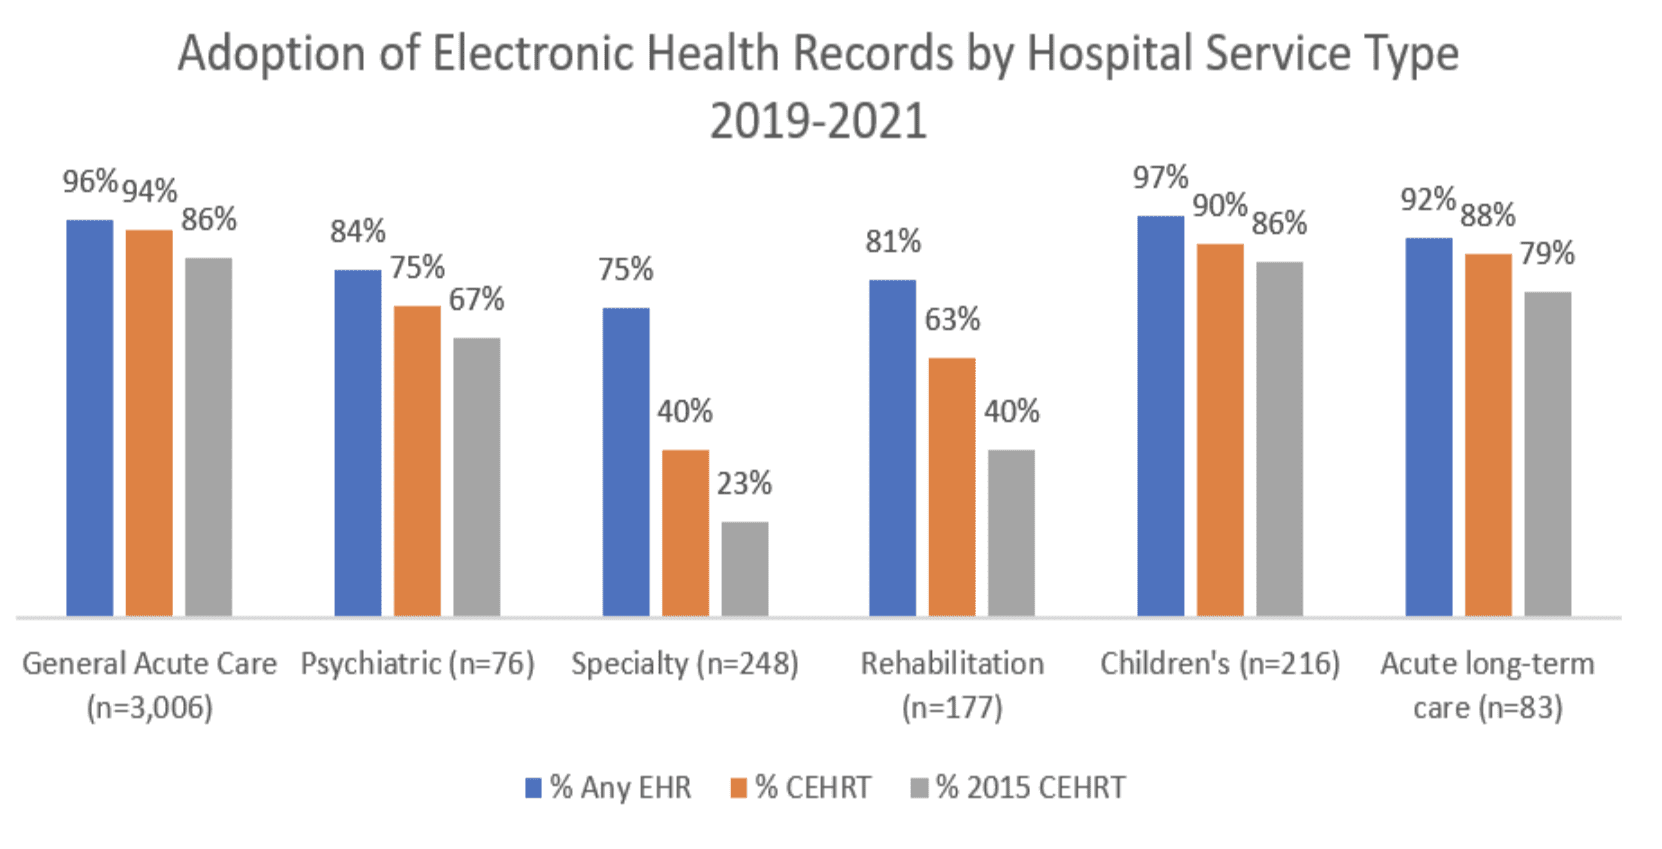 Electronic health record adoption between 2019 and 2021